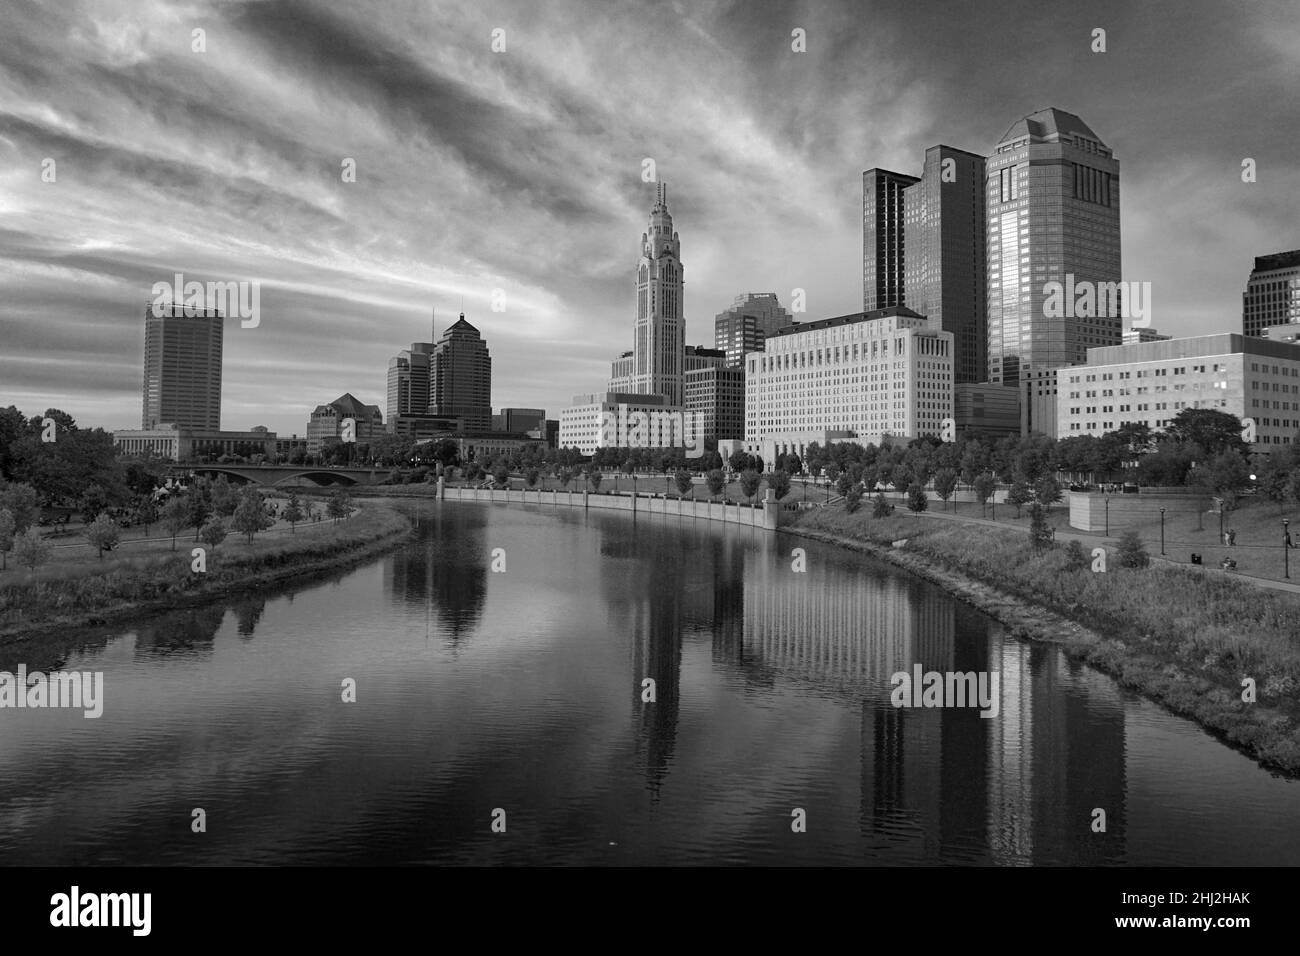 Cityscape of Columbus Ohio with the buildings reflecting in the Scioto River Stock Photo